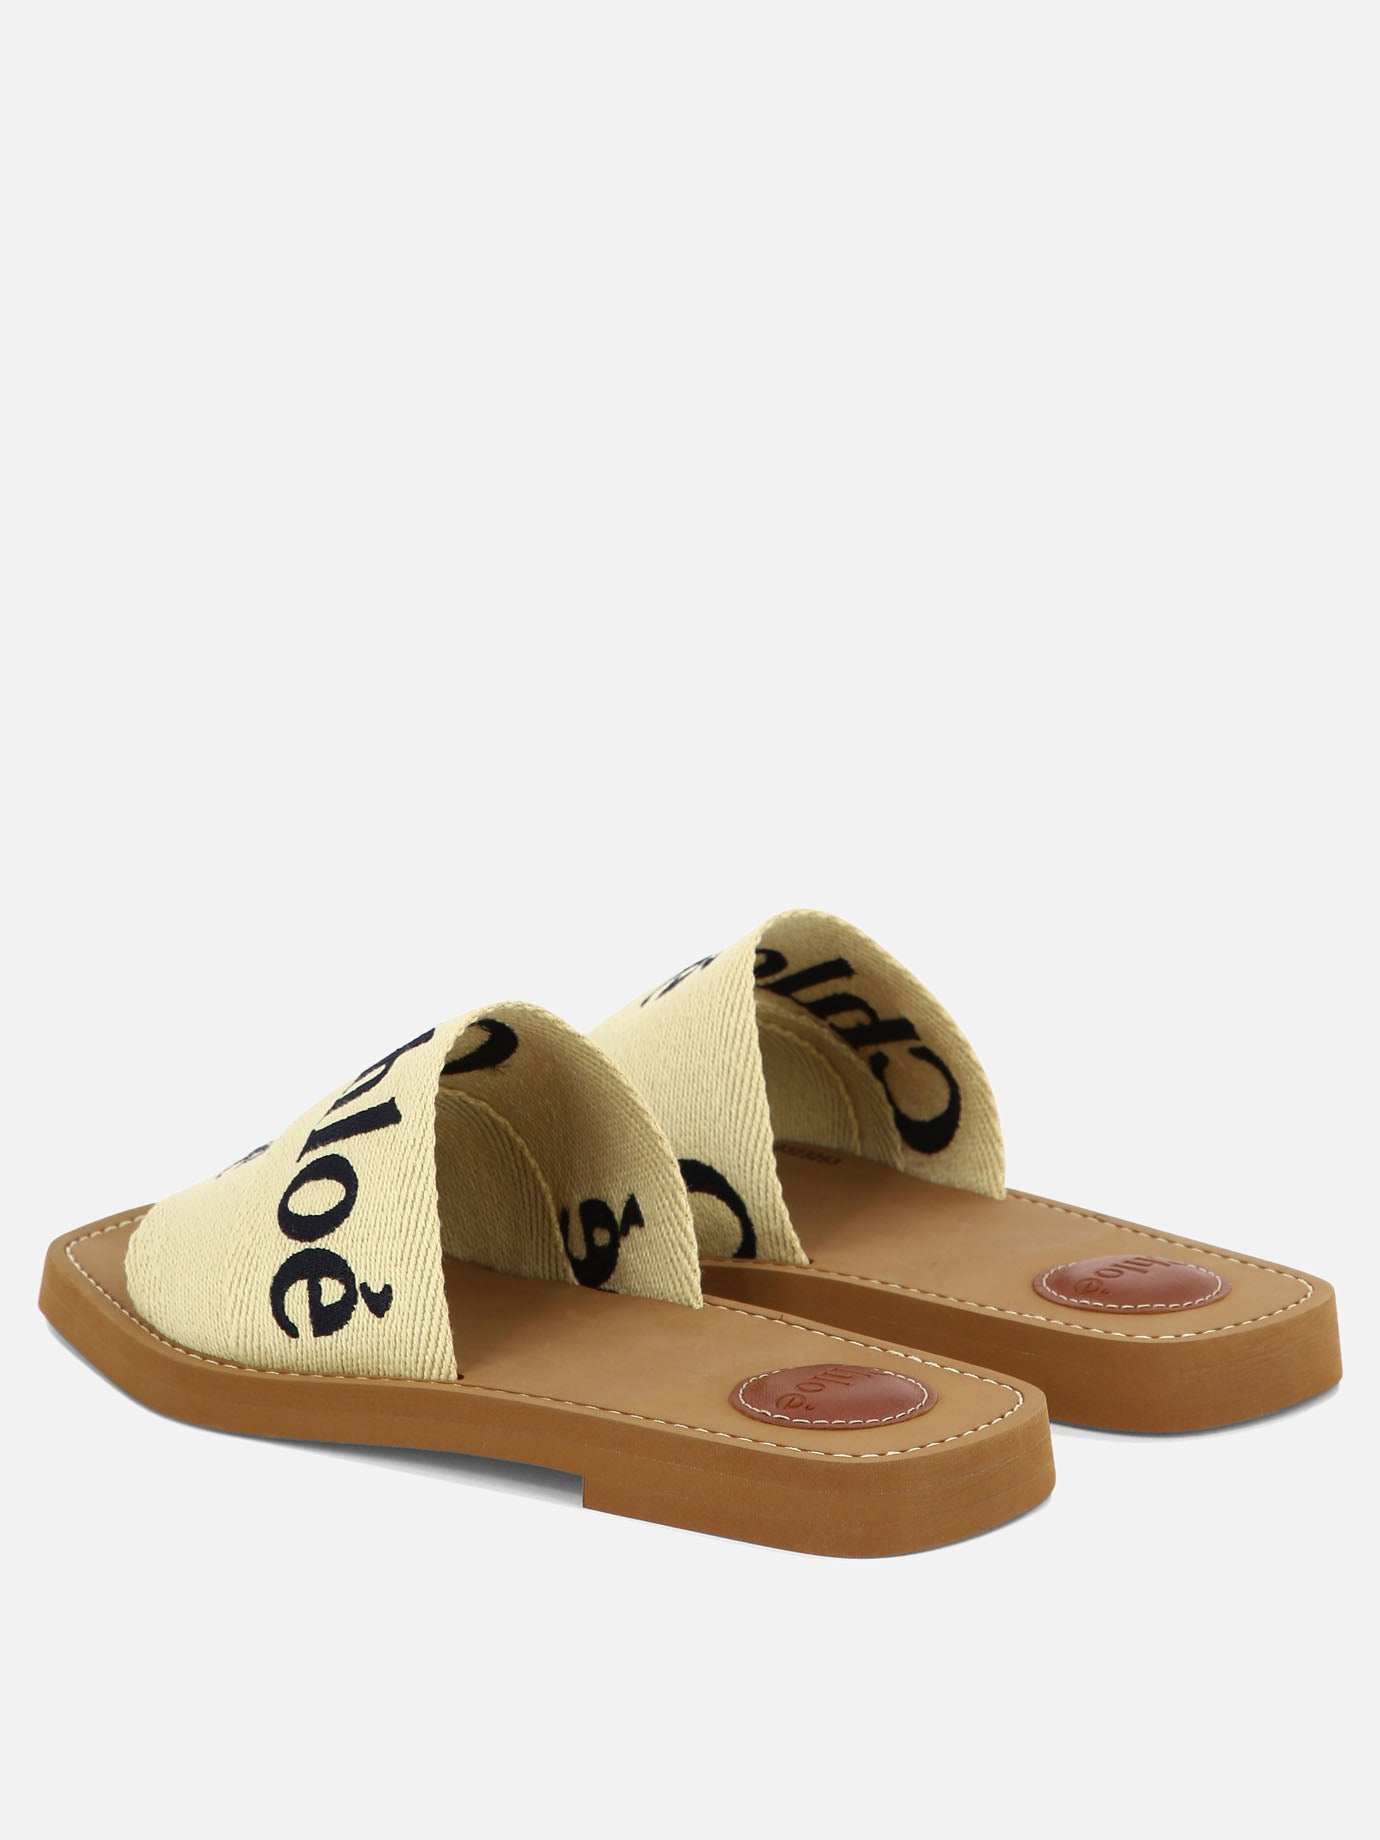 "Woody" sandals